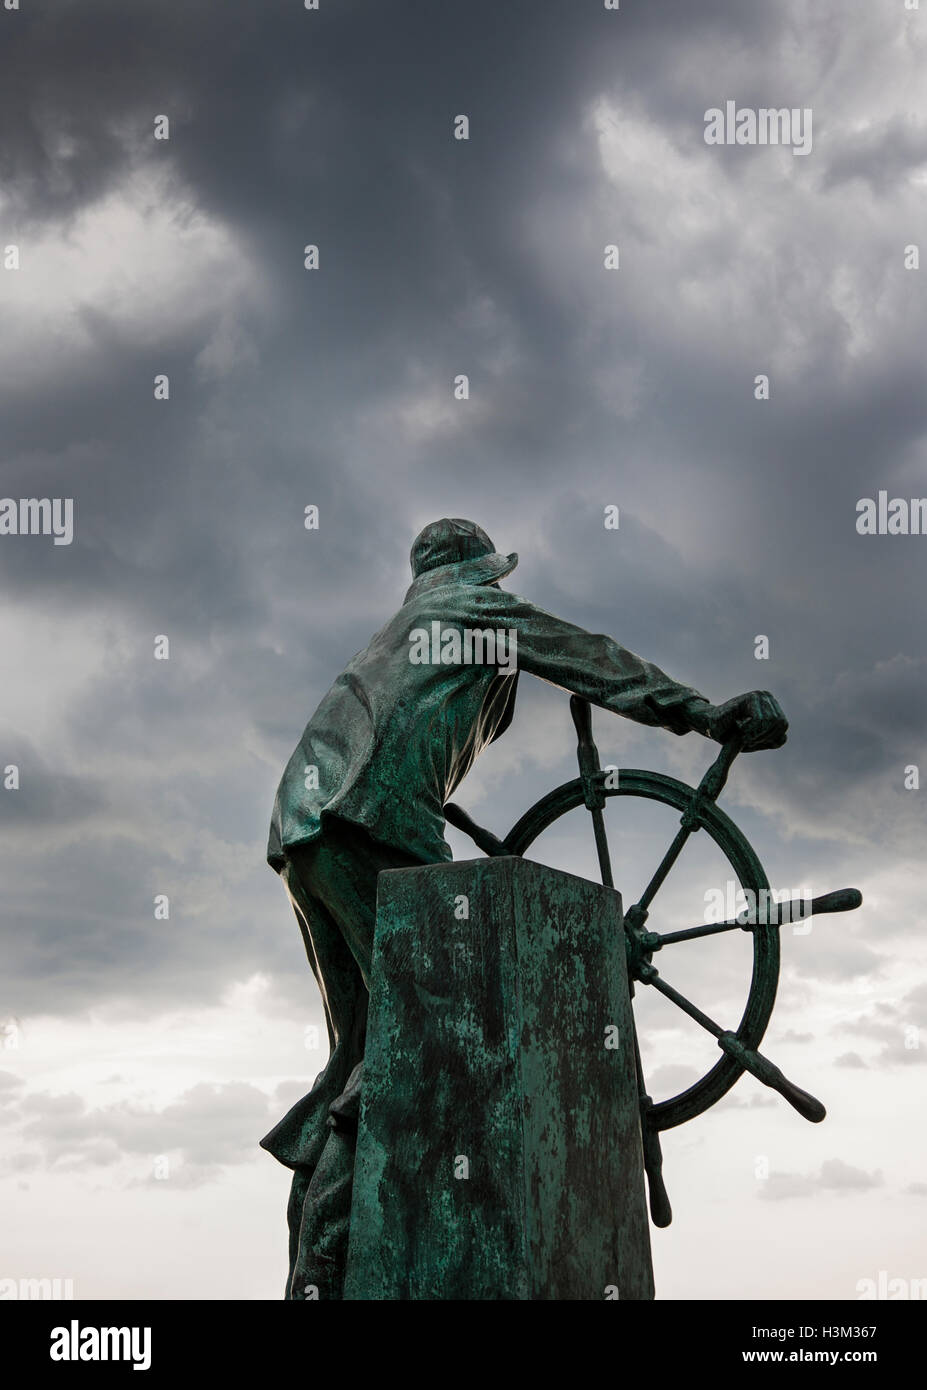 Fisherman's Memorial sculpture by the sea, ship in storm, Glouchester, Massachusetts, USA , US 'They That Go Down to the Sea in Ships', New England Stock Photo